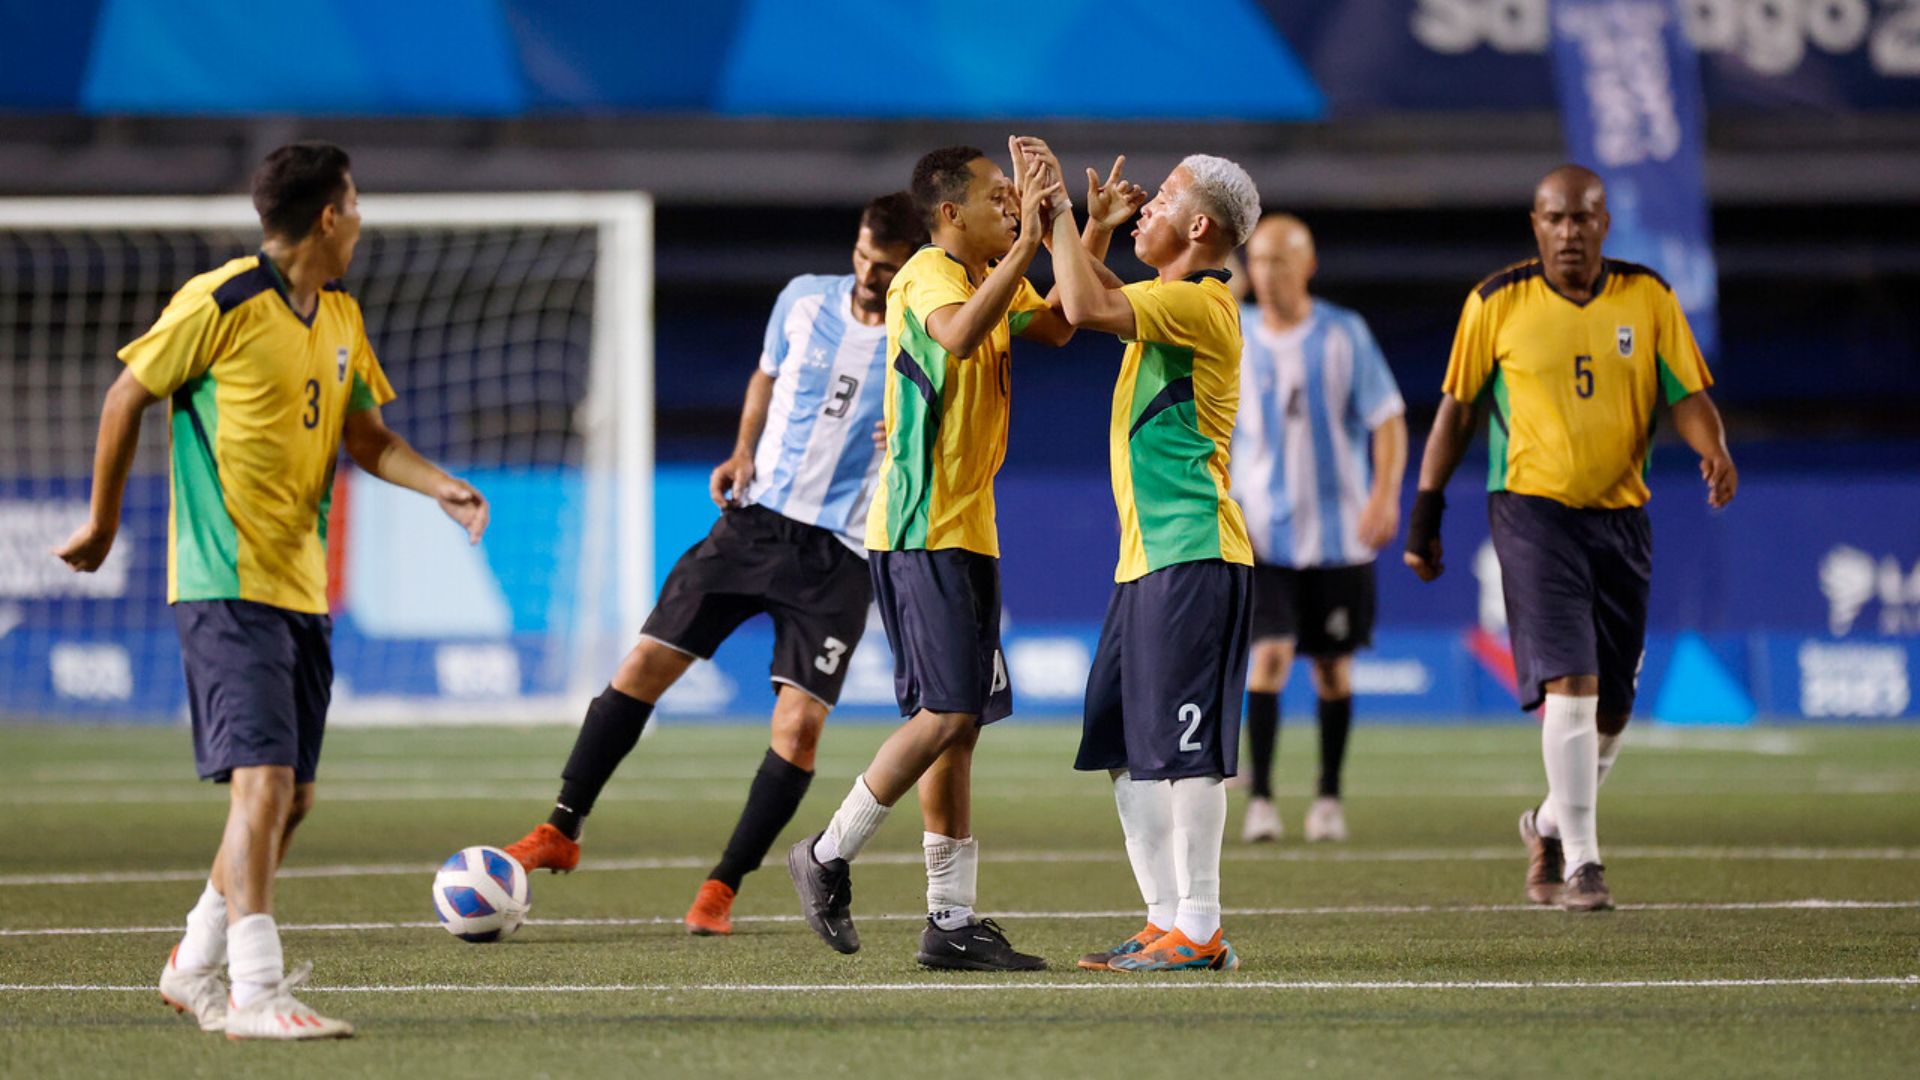 Brazil beats Argentina in the classic and wins gold in PC Football